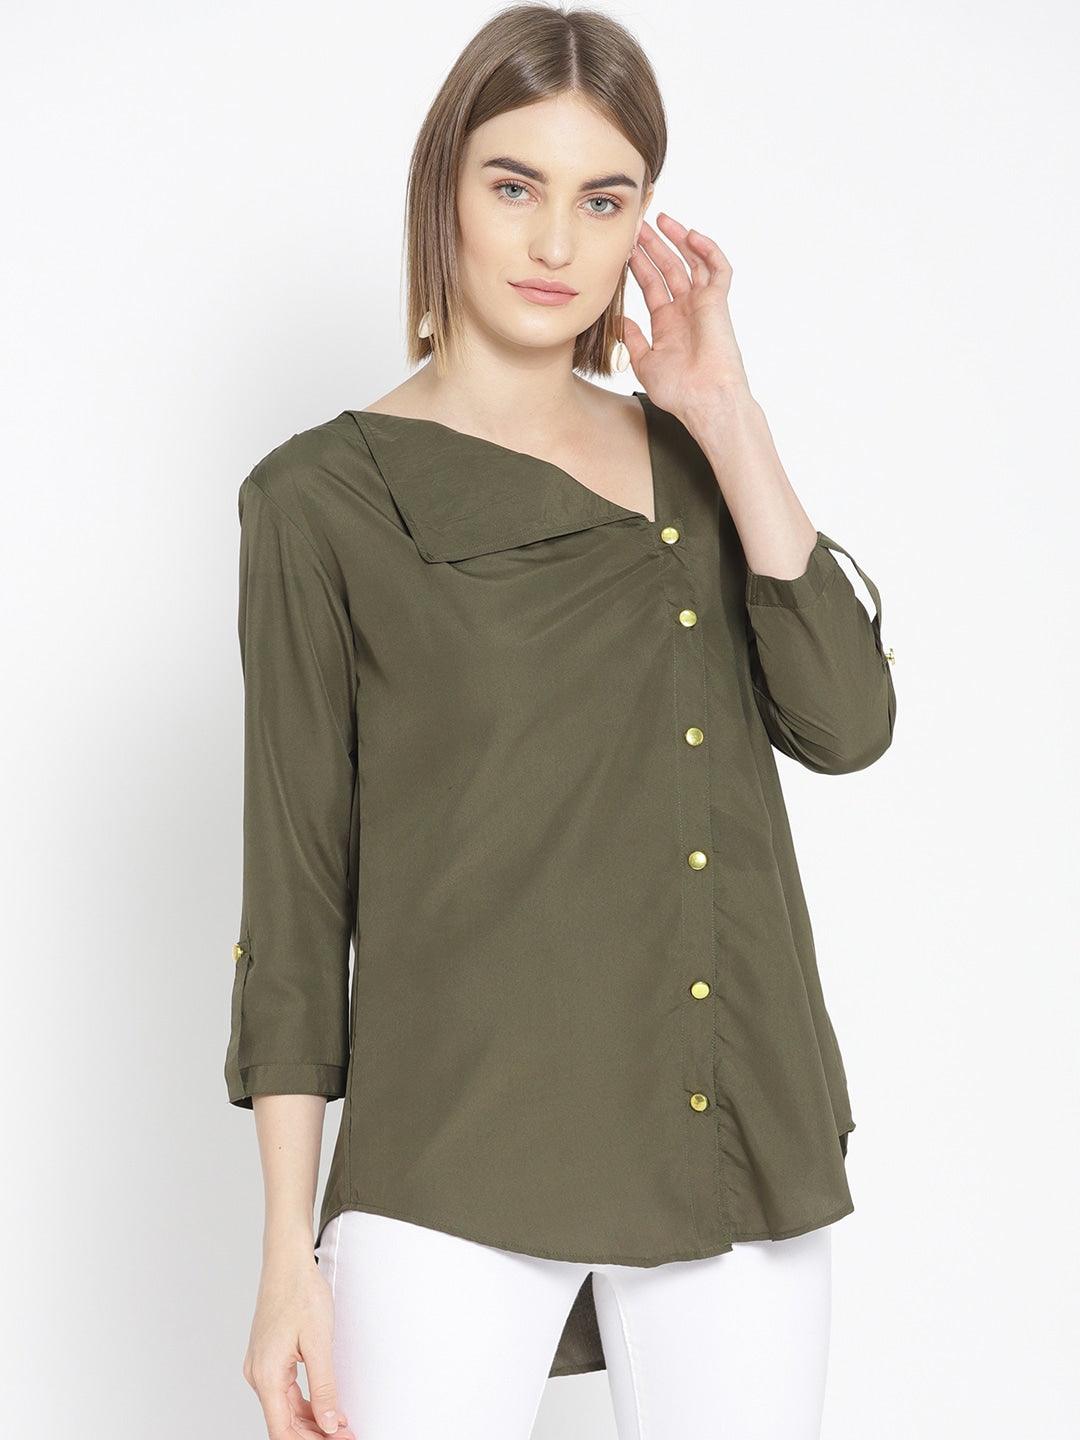 Qurvii Plus Size Women Olive Green Solid High-Low Top - Qurvii India